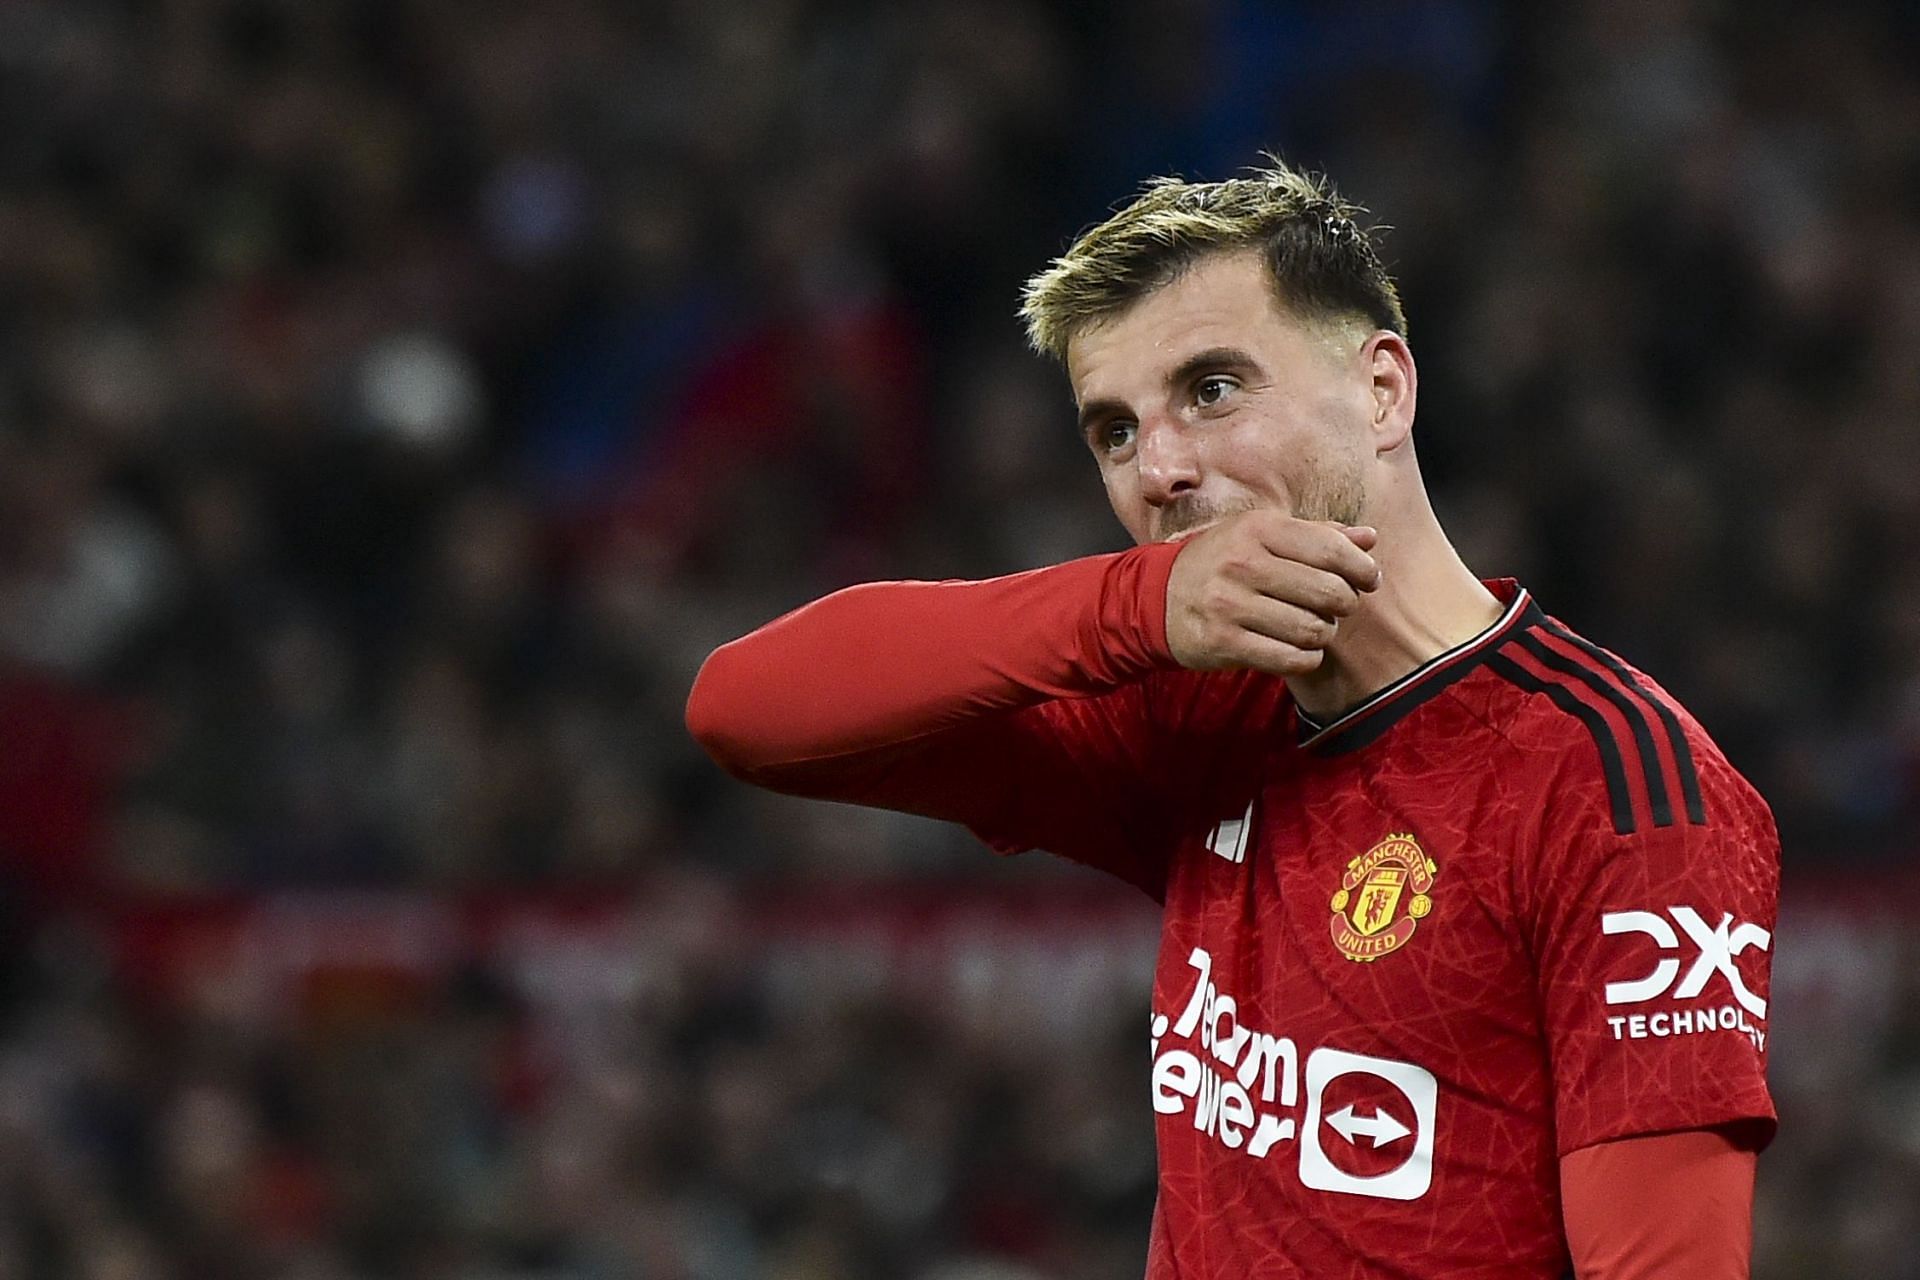 Mason Mount moved to Old Trafford this summer.